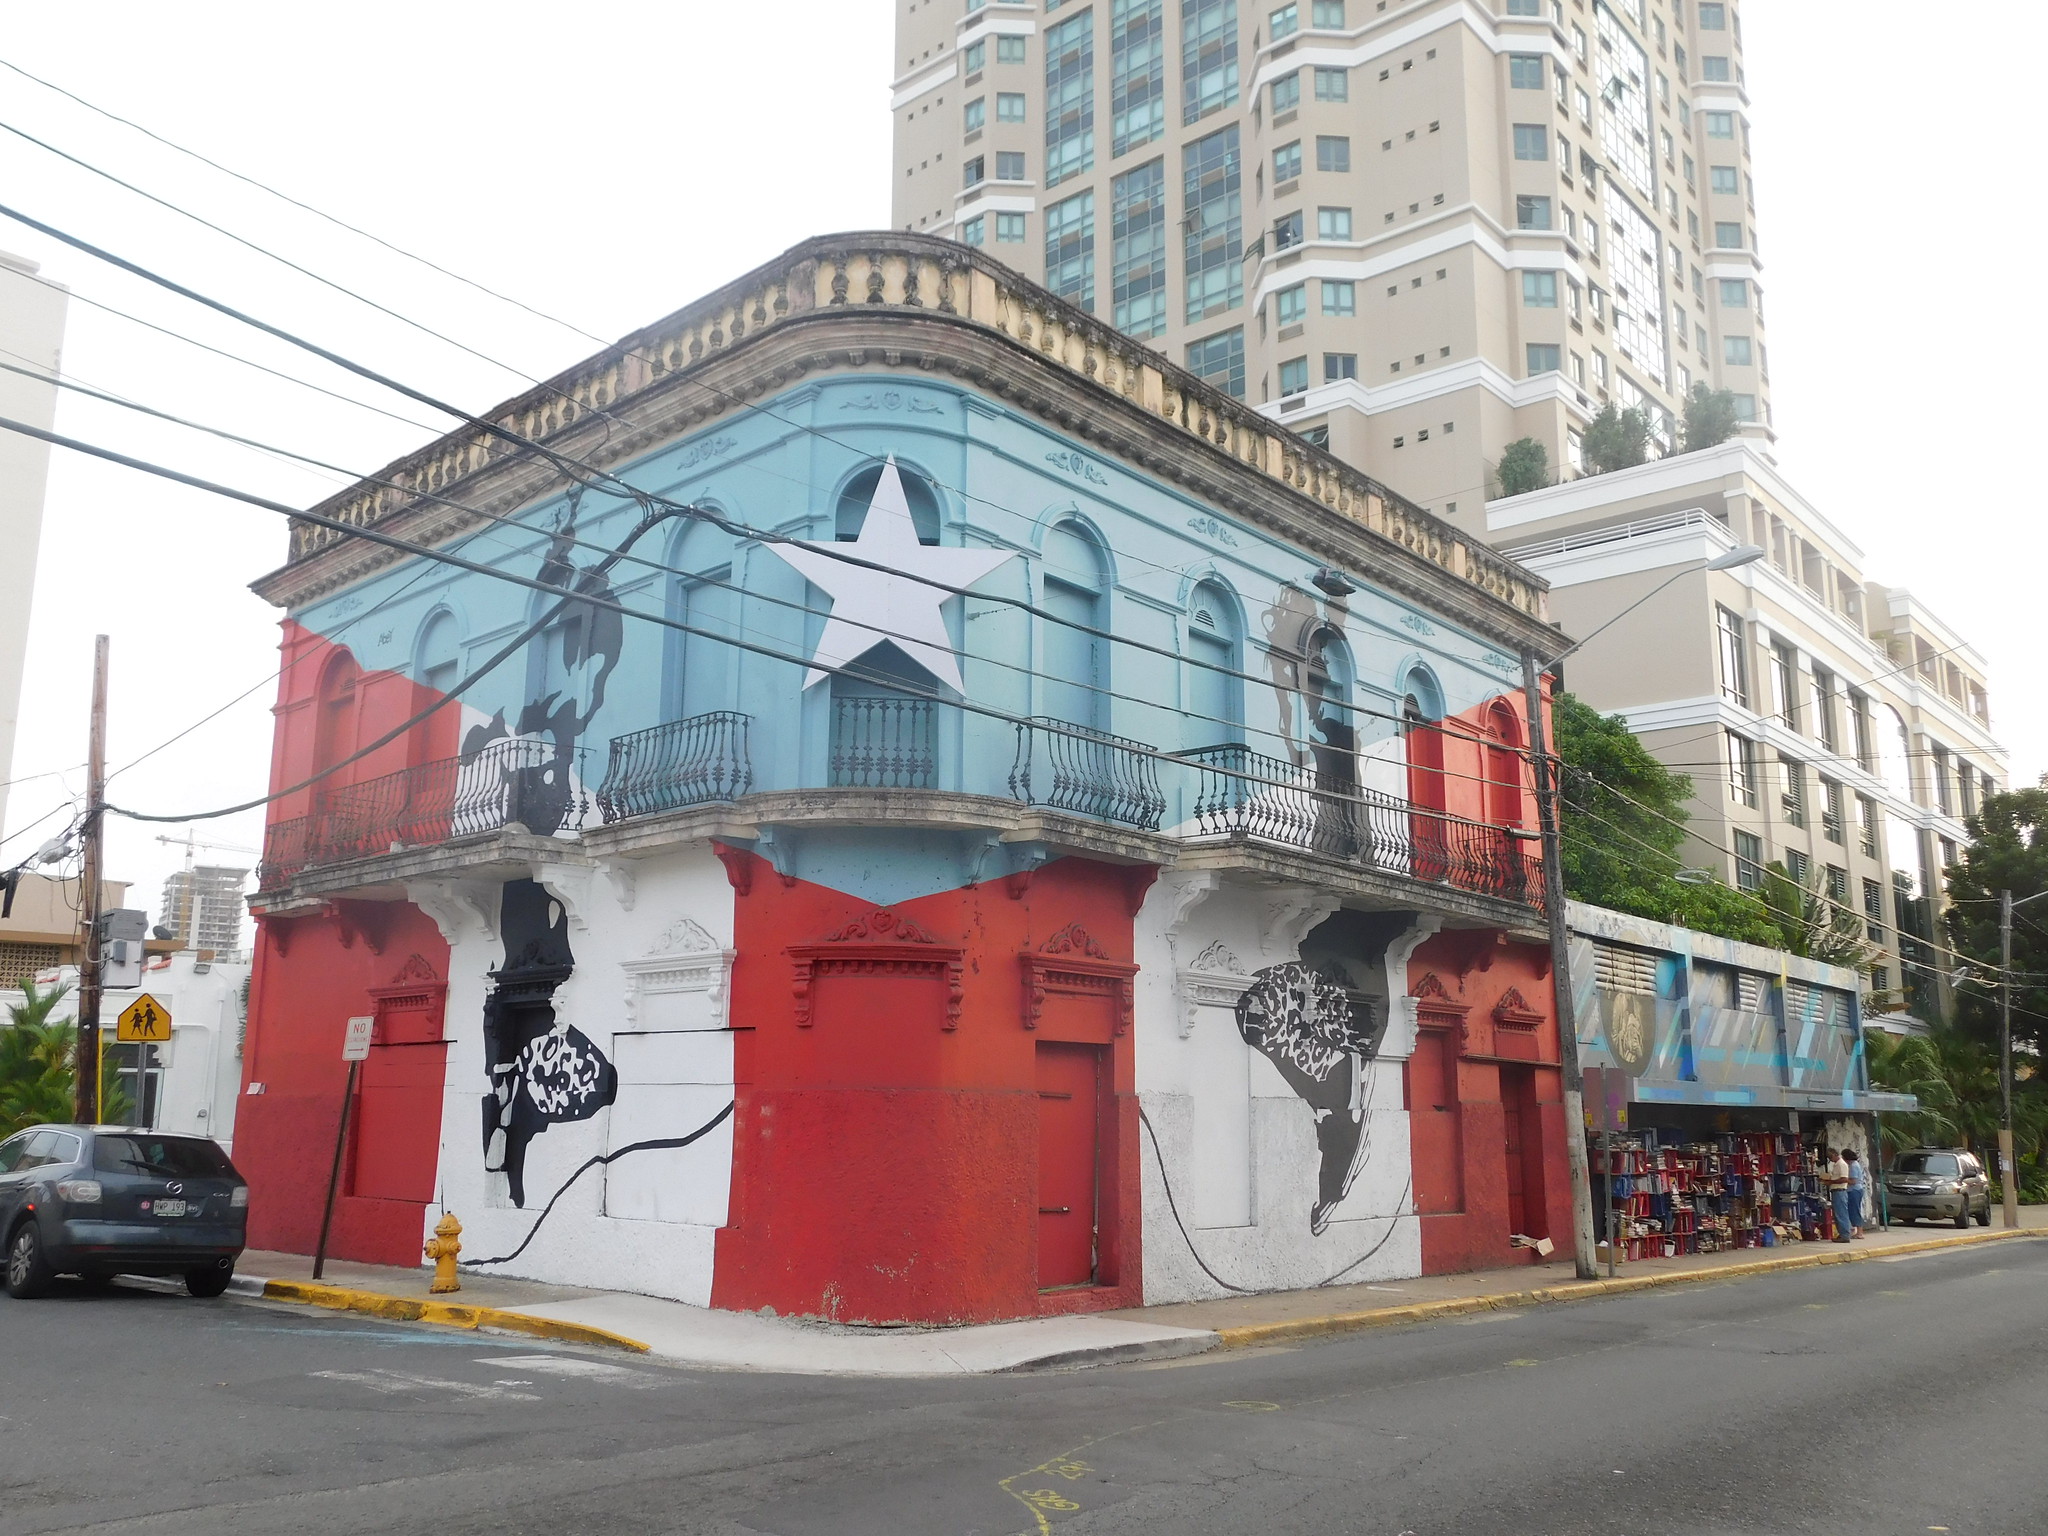 Puerto Rico Flag Building by Jimmy Emerson CC BY-NC-ND 2.0 via Flickr